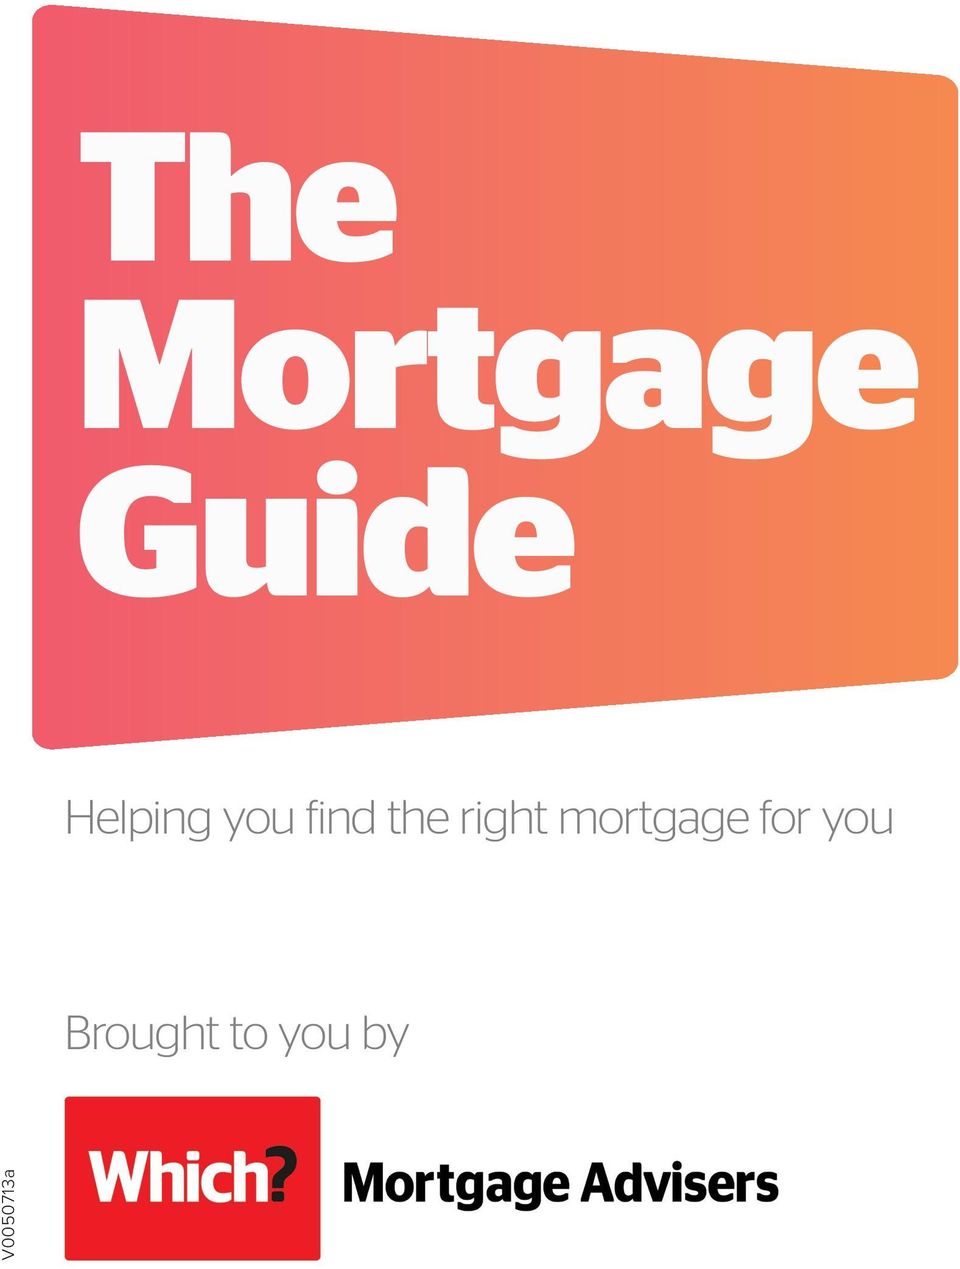 the right mortgage